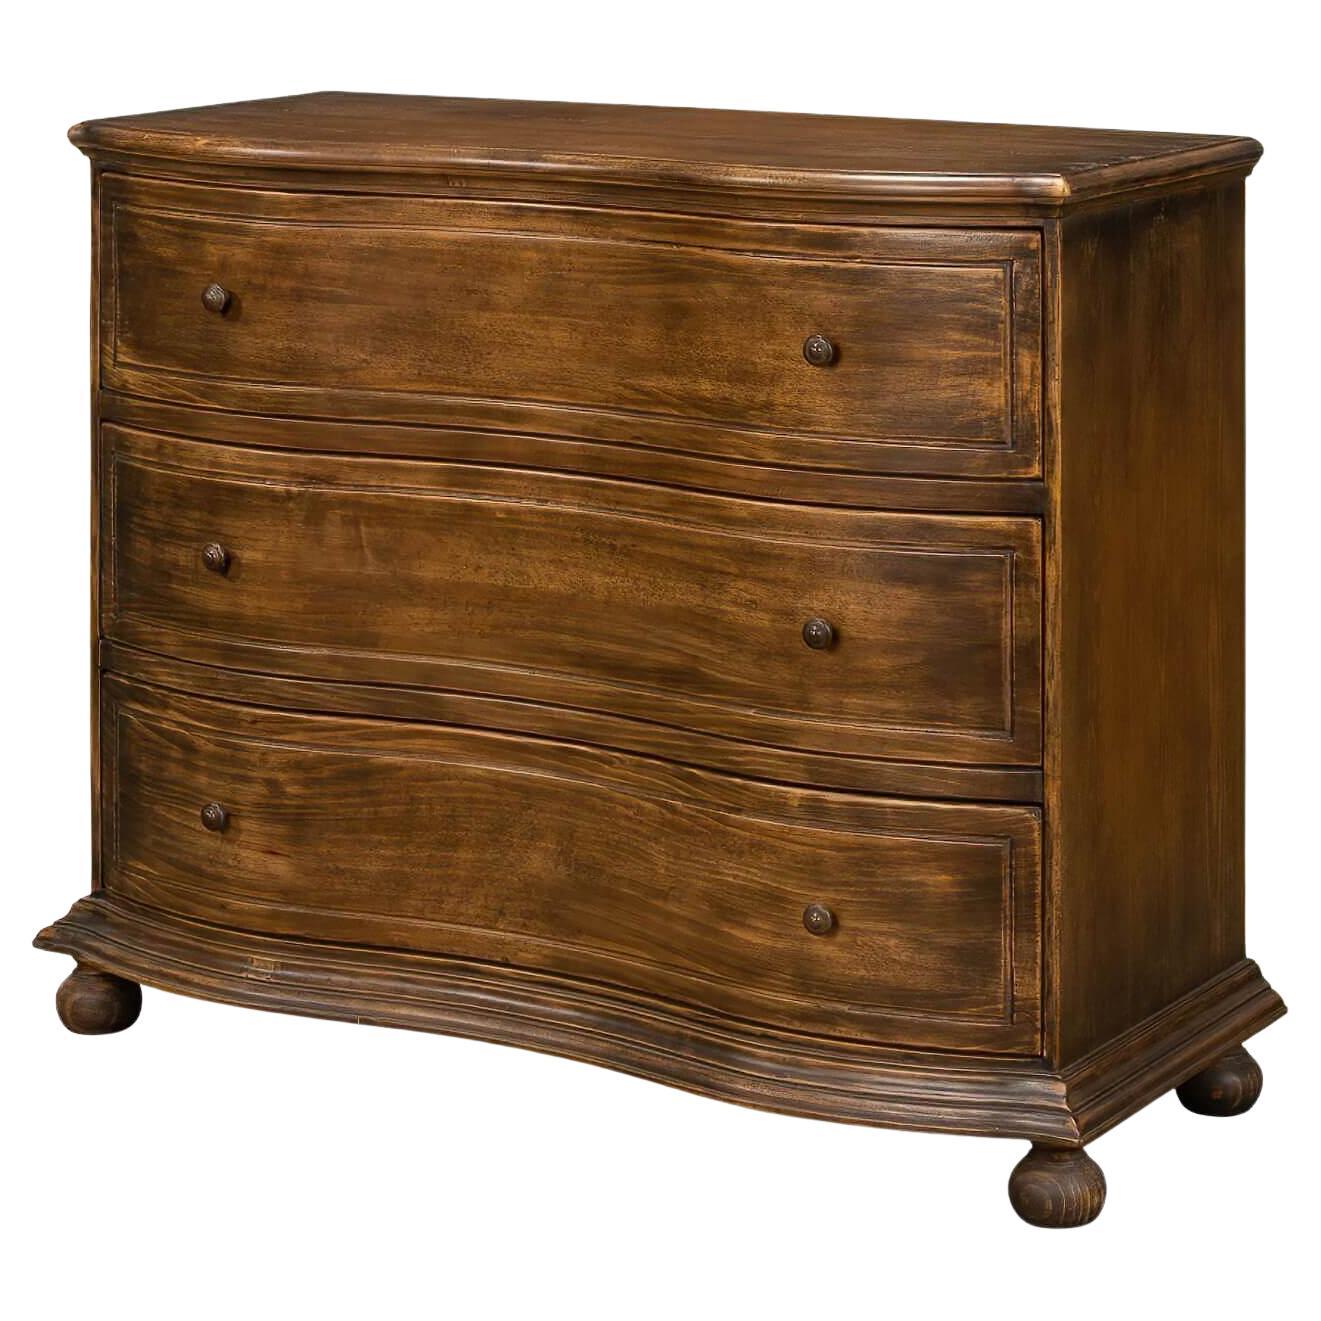 Rustic Serpentine Chest of Drawers